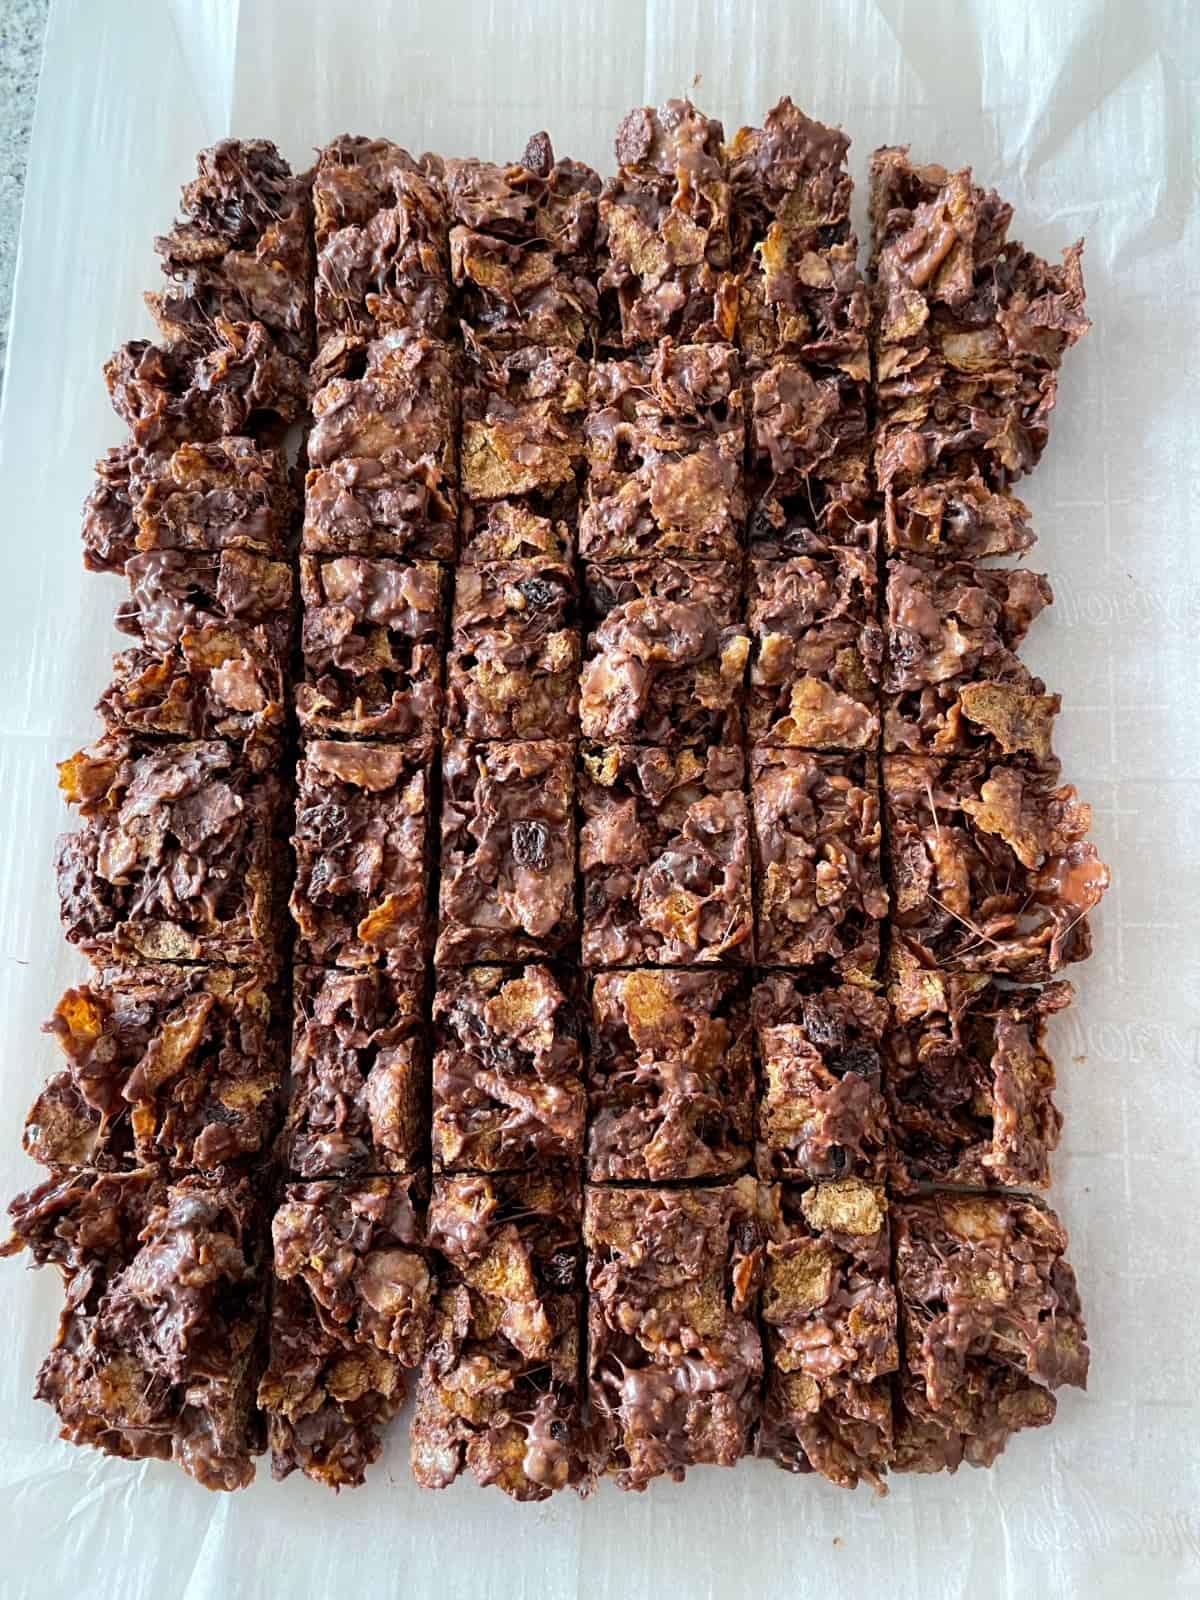 No-bake raisin bran cereal bars cut into 36 squares on parchment.